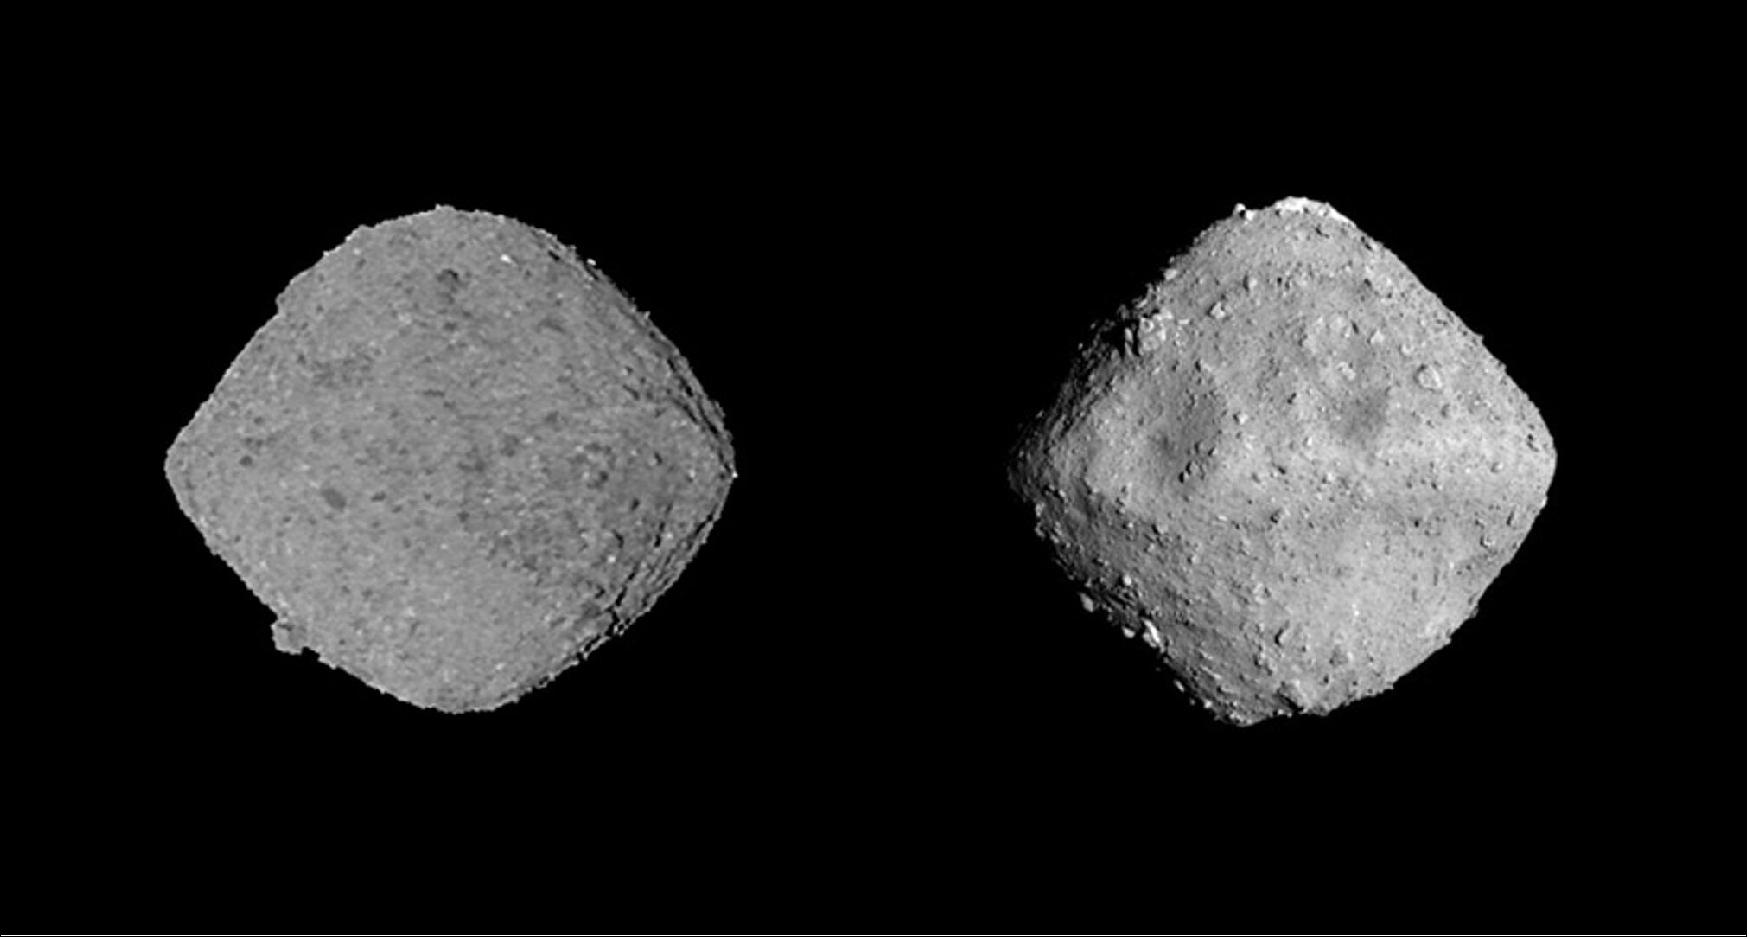 Figure 23: Asteroids Bennu and Ryugu. Both the 525-m diameter Bennu asteroid visited by NASA’s OSIRIS-REx and 1-km diameter Ryugu asteroid reached by Japan’s Hayabusa2 possess the same distinct spinning-top shape and similar material densities. However the pair contain differing amounts of water, as revealed in spectral mapping of hydrated materials. Ryugu appears weakly hydrated compared to Bennu, despite being a comparative youth in asteroid terms, estimated at a mere 100 million years old (image credit: ESA)